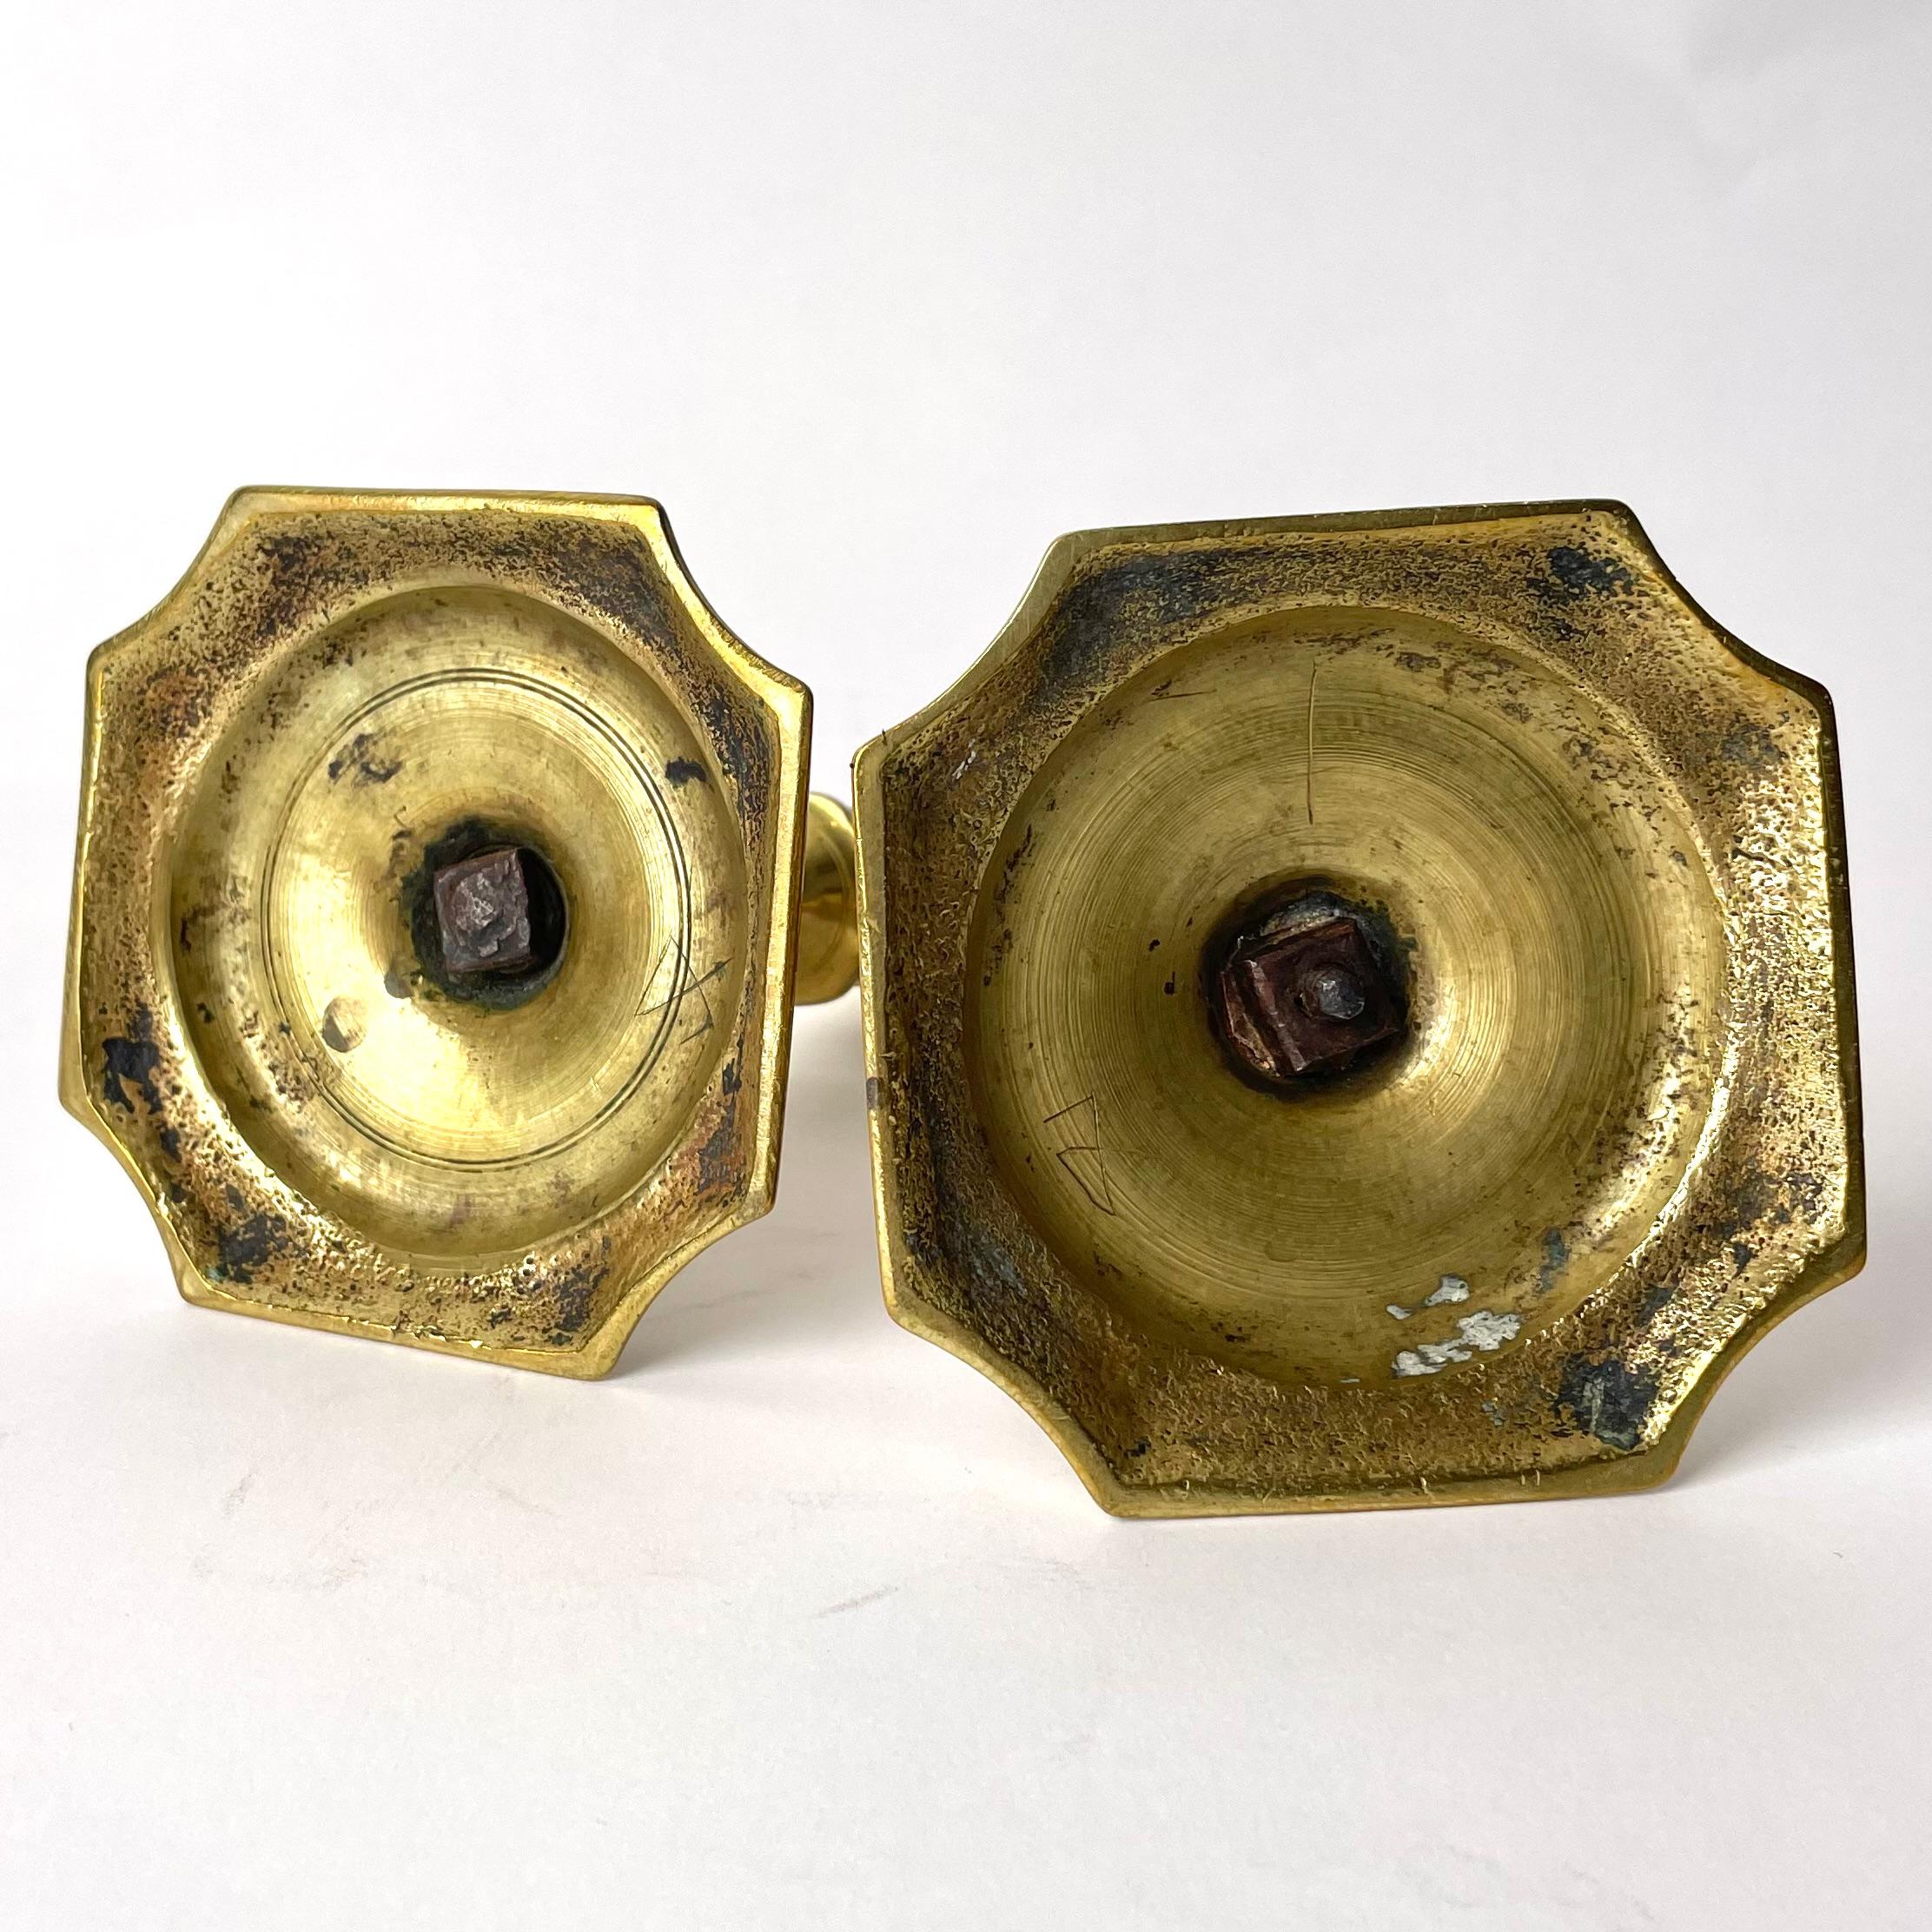 A Pair of 2 Lovely Brass Candlesticks, Late Baroque, Early 18th Century For Sale 3